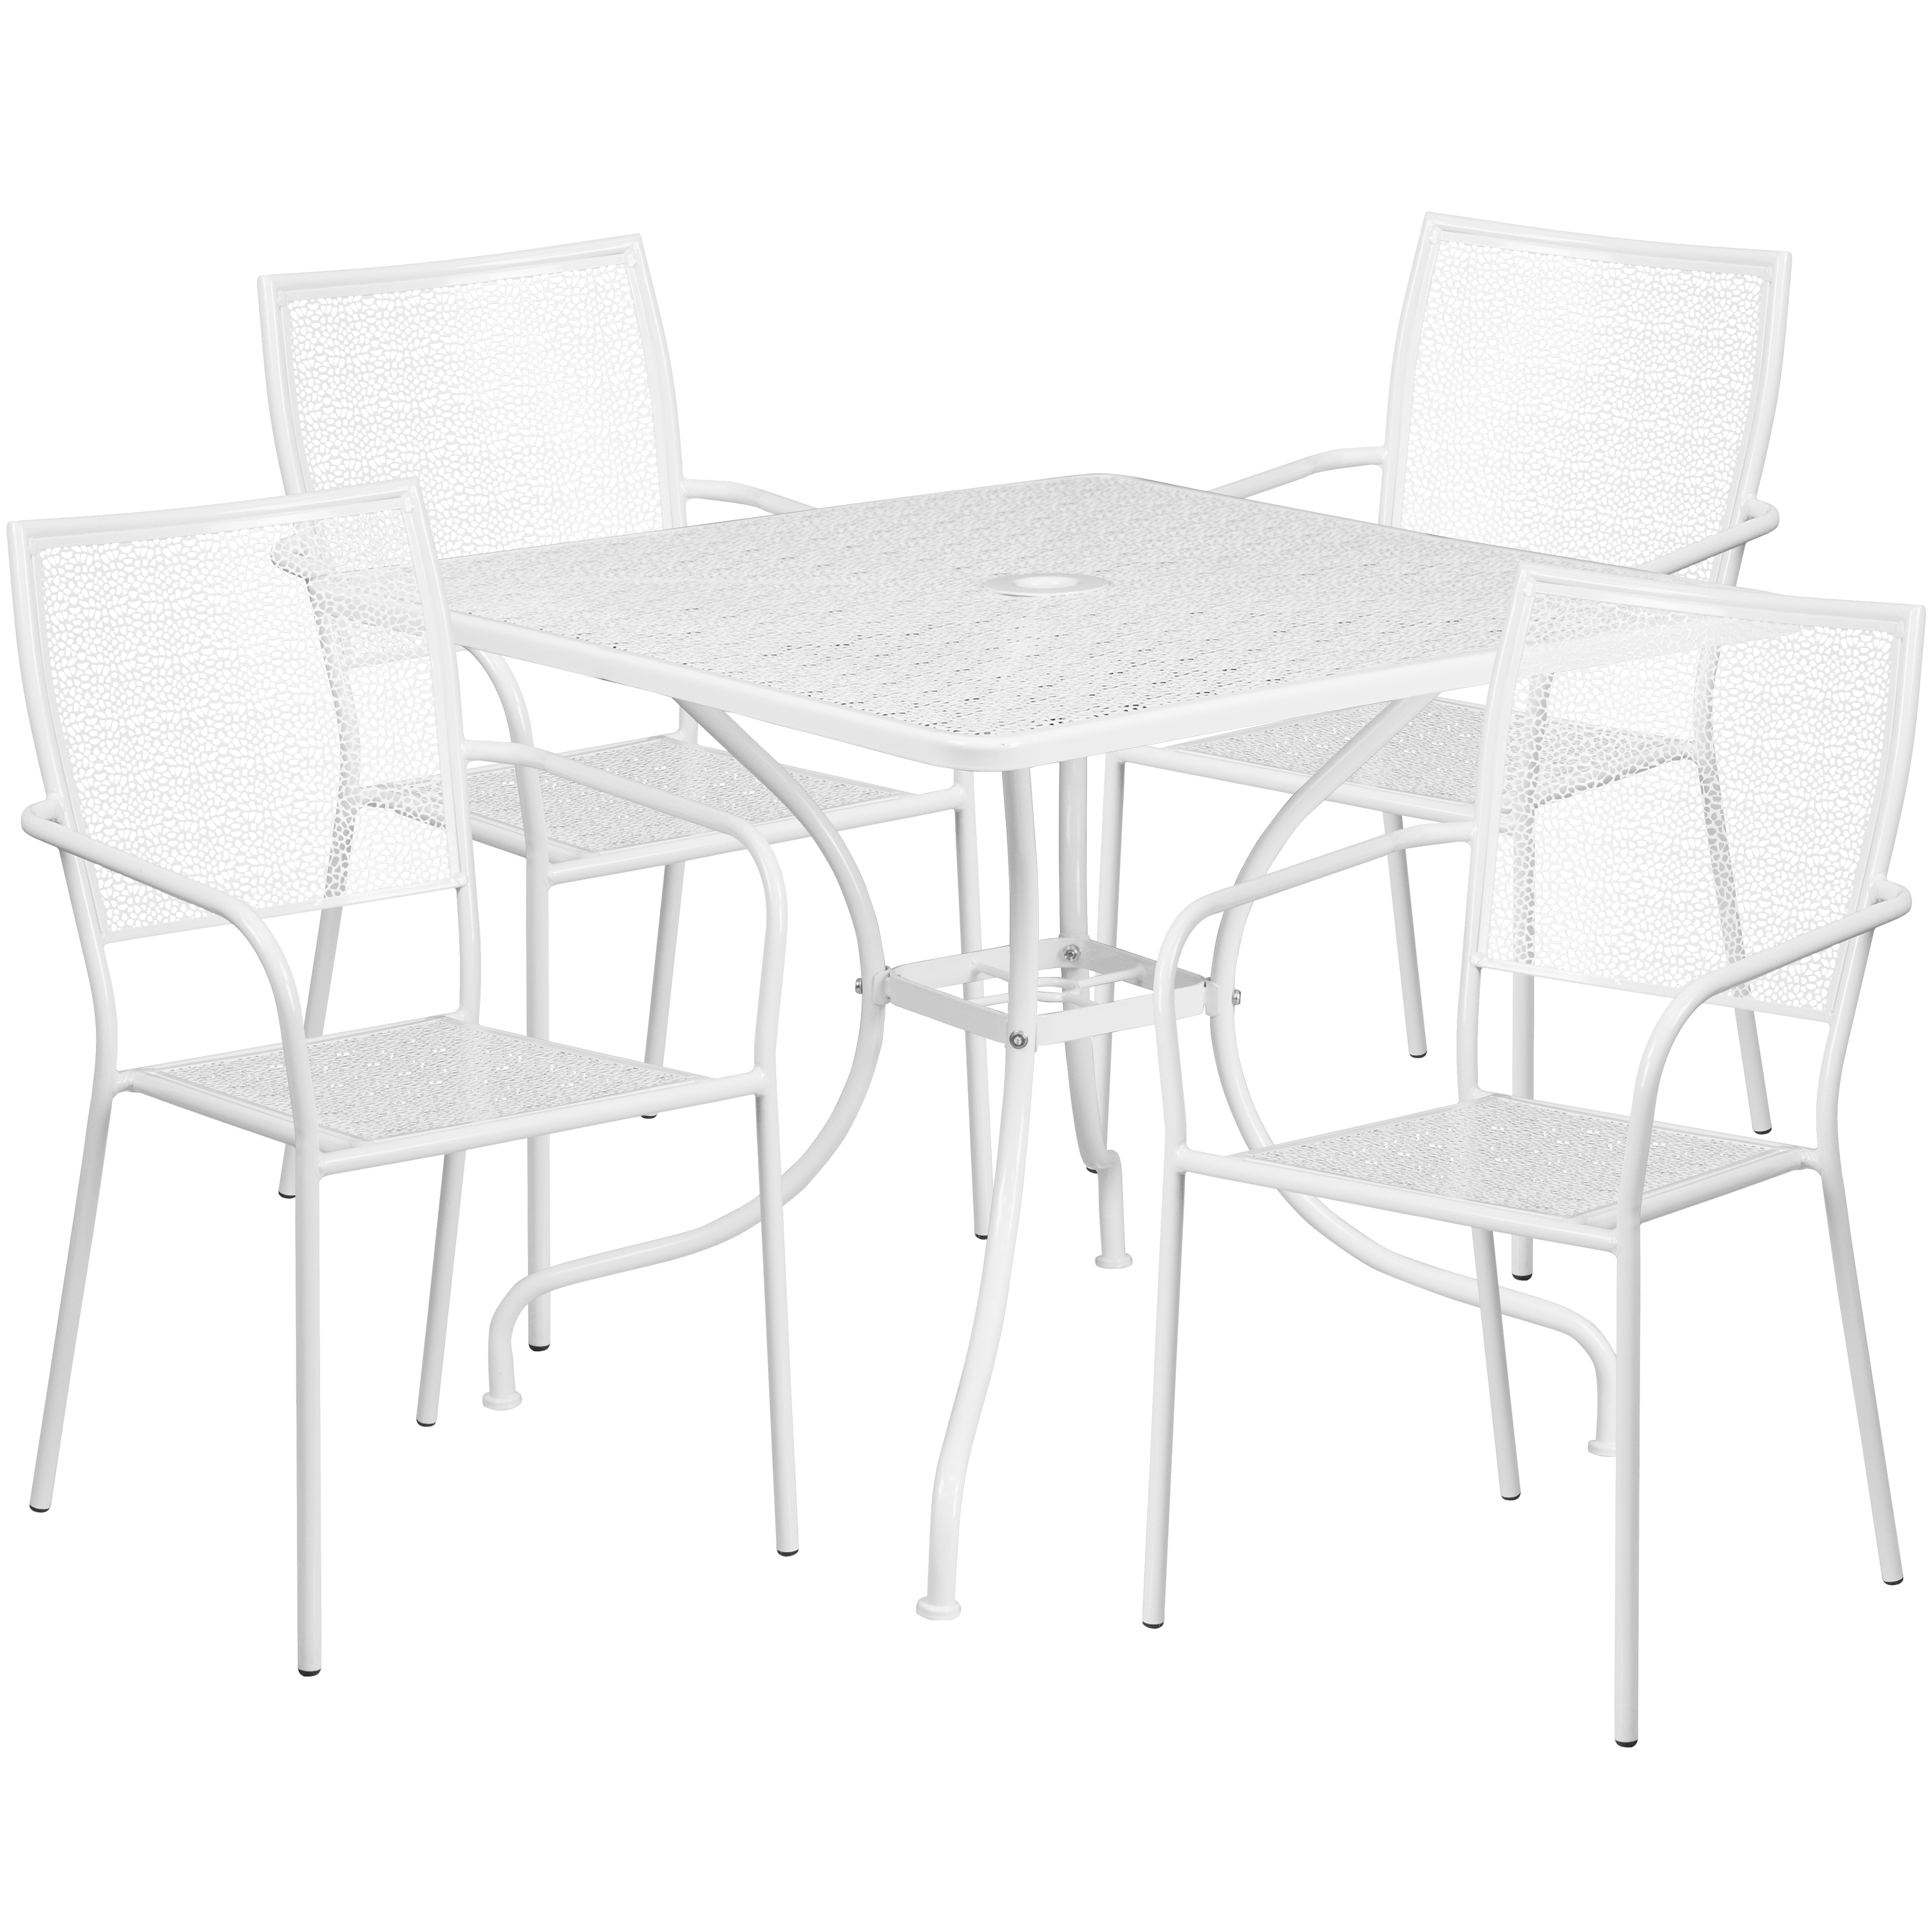 Flash Furniture CO-35SQ-02CHR4-WH-GG 35.5" Square White Indoor/Outdoor Steel Patio Table Set with 4 Square Back Chairs